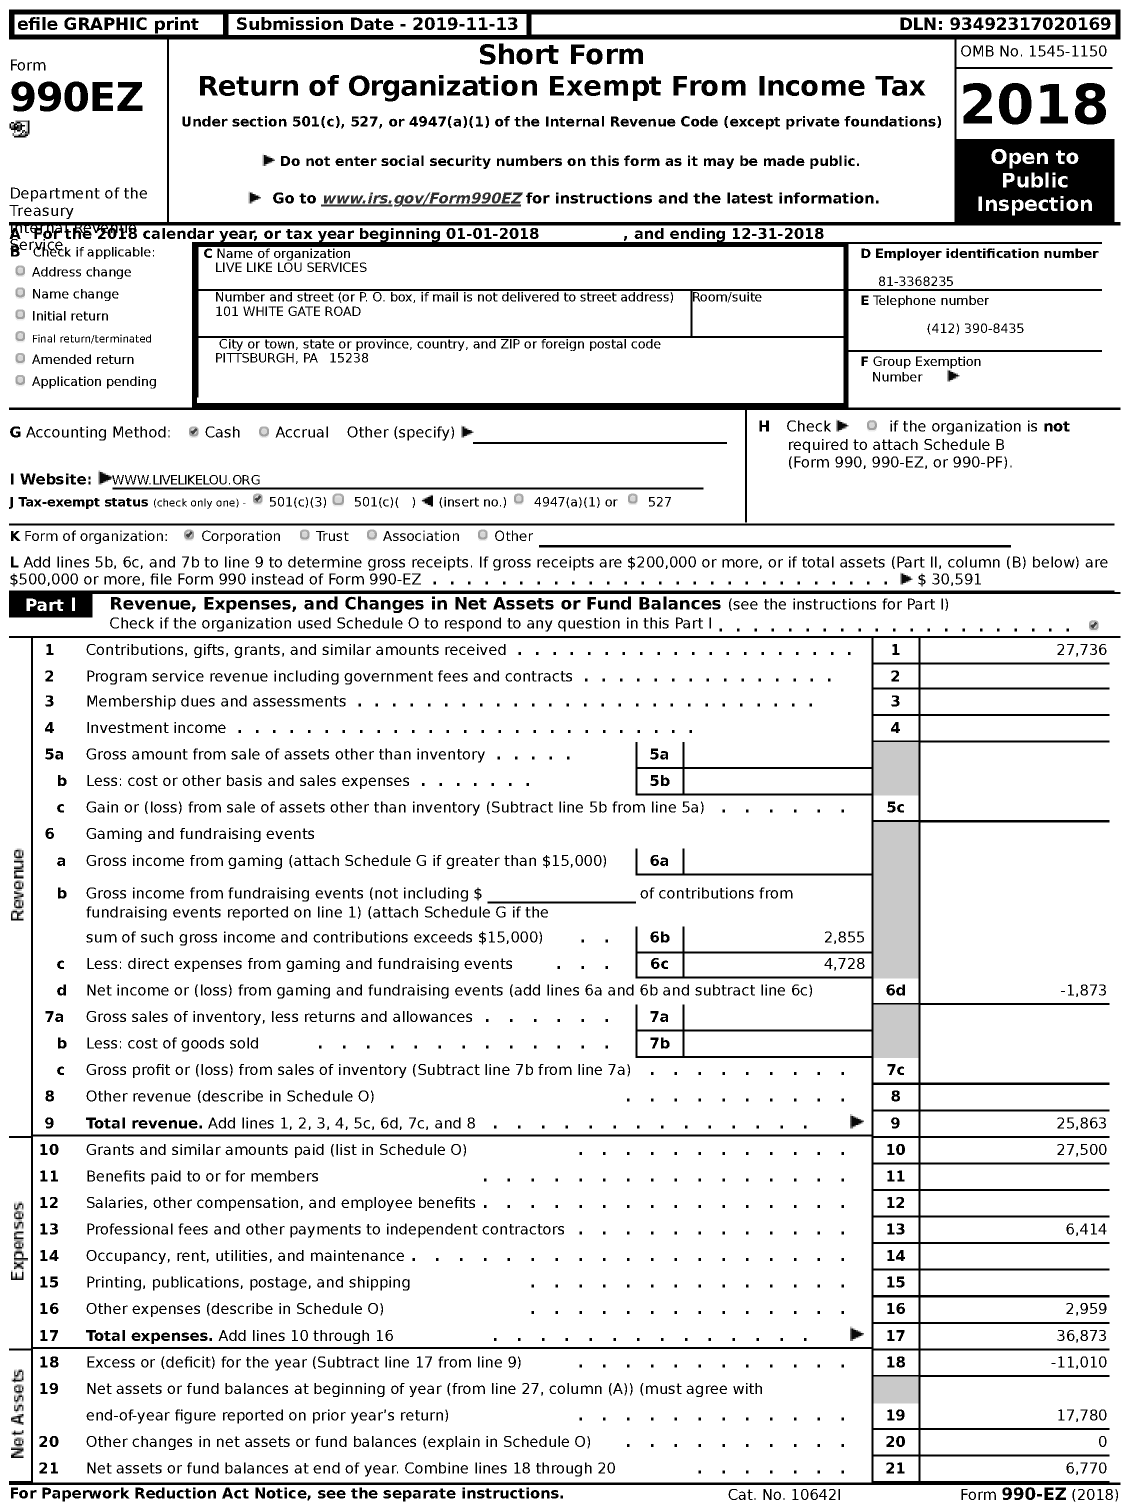 Image of first page of 2018 Form 990EZ for Live Like Lou Services